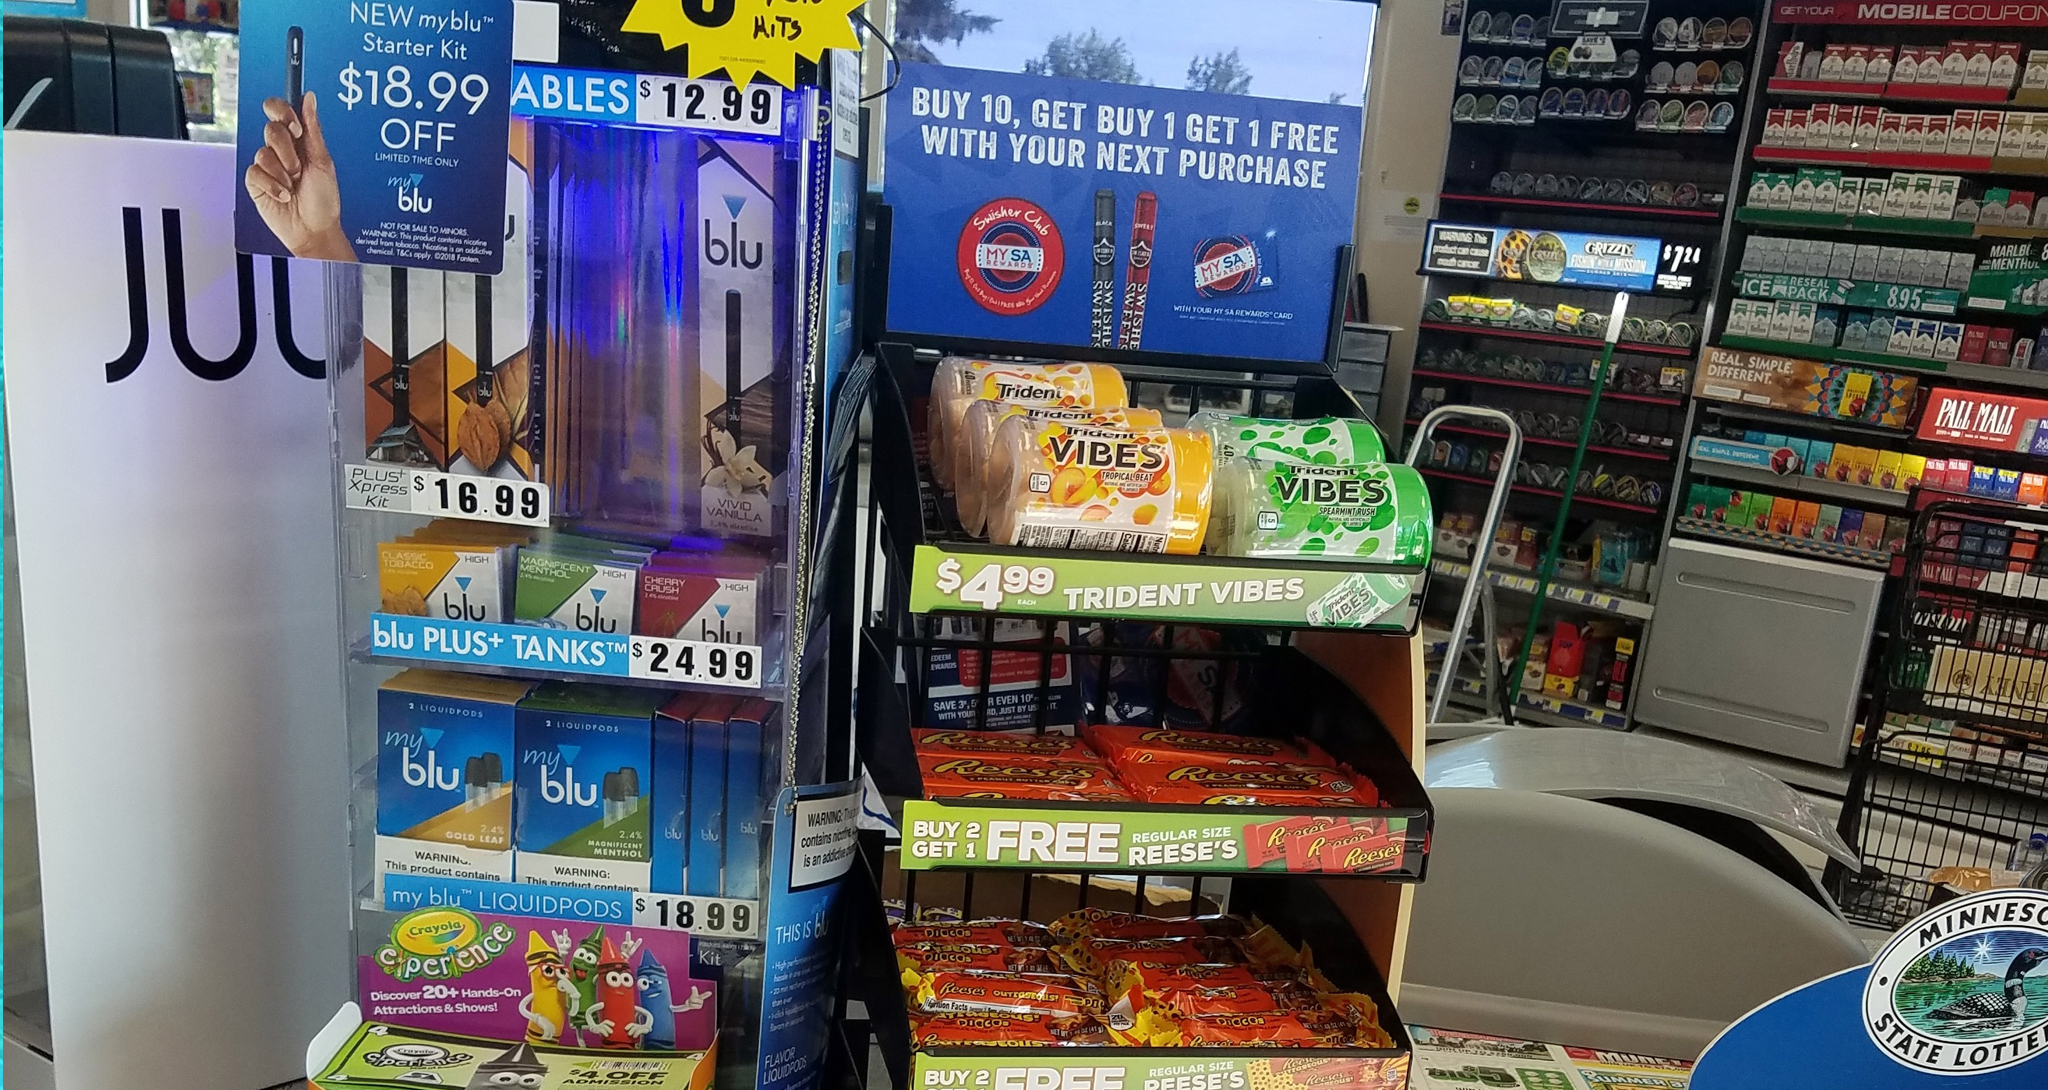 Tobacco products inside of a convenience store